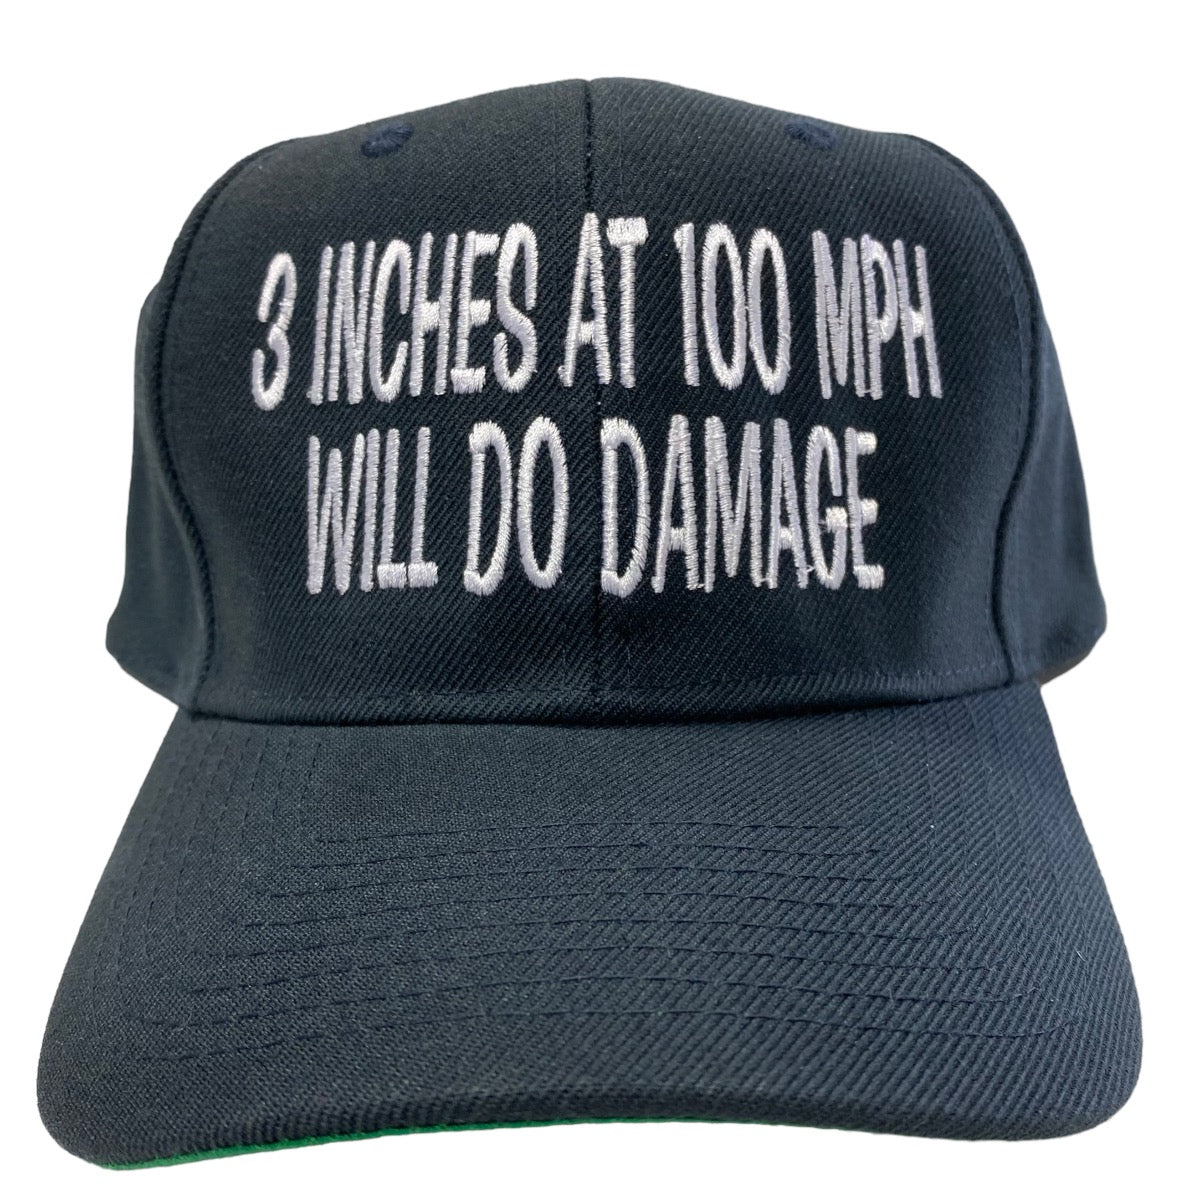 3 inches at 100 mph will do damage vintage SnapBack Hat Cap Custom